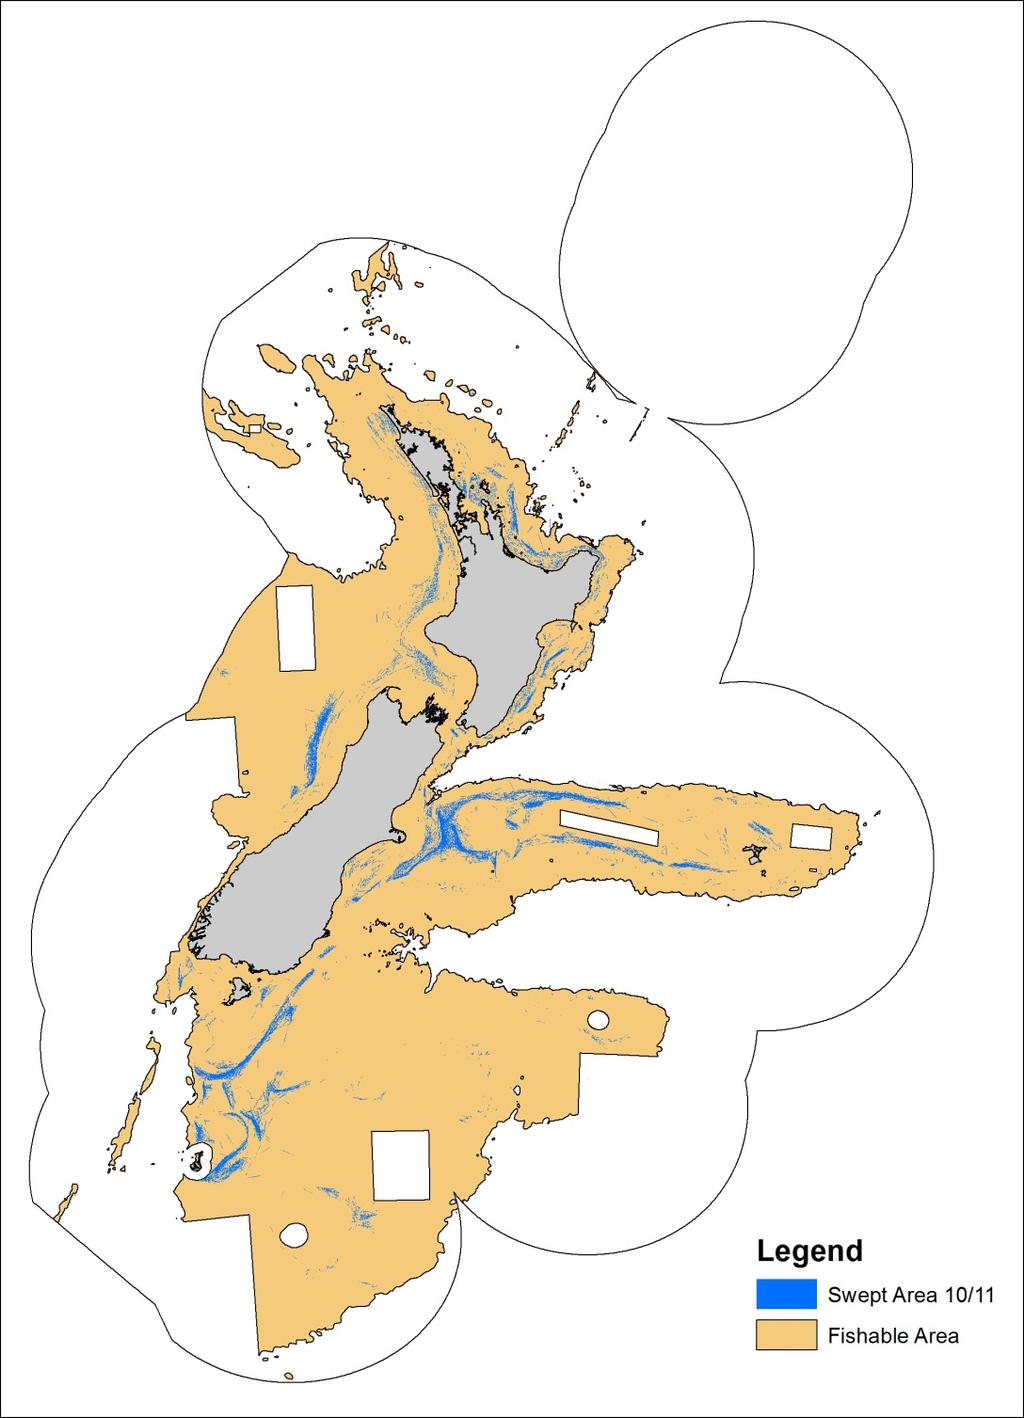 Figure 20: Estimated swept area in 2010/11 overlain on the fishable area. The swept area comprises 3.8% of the fishable area (i.e. Shallower than 1600 m) and 1.3% of the EEZ and TS combined.